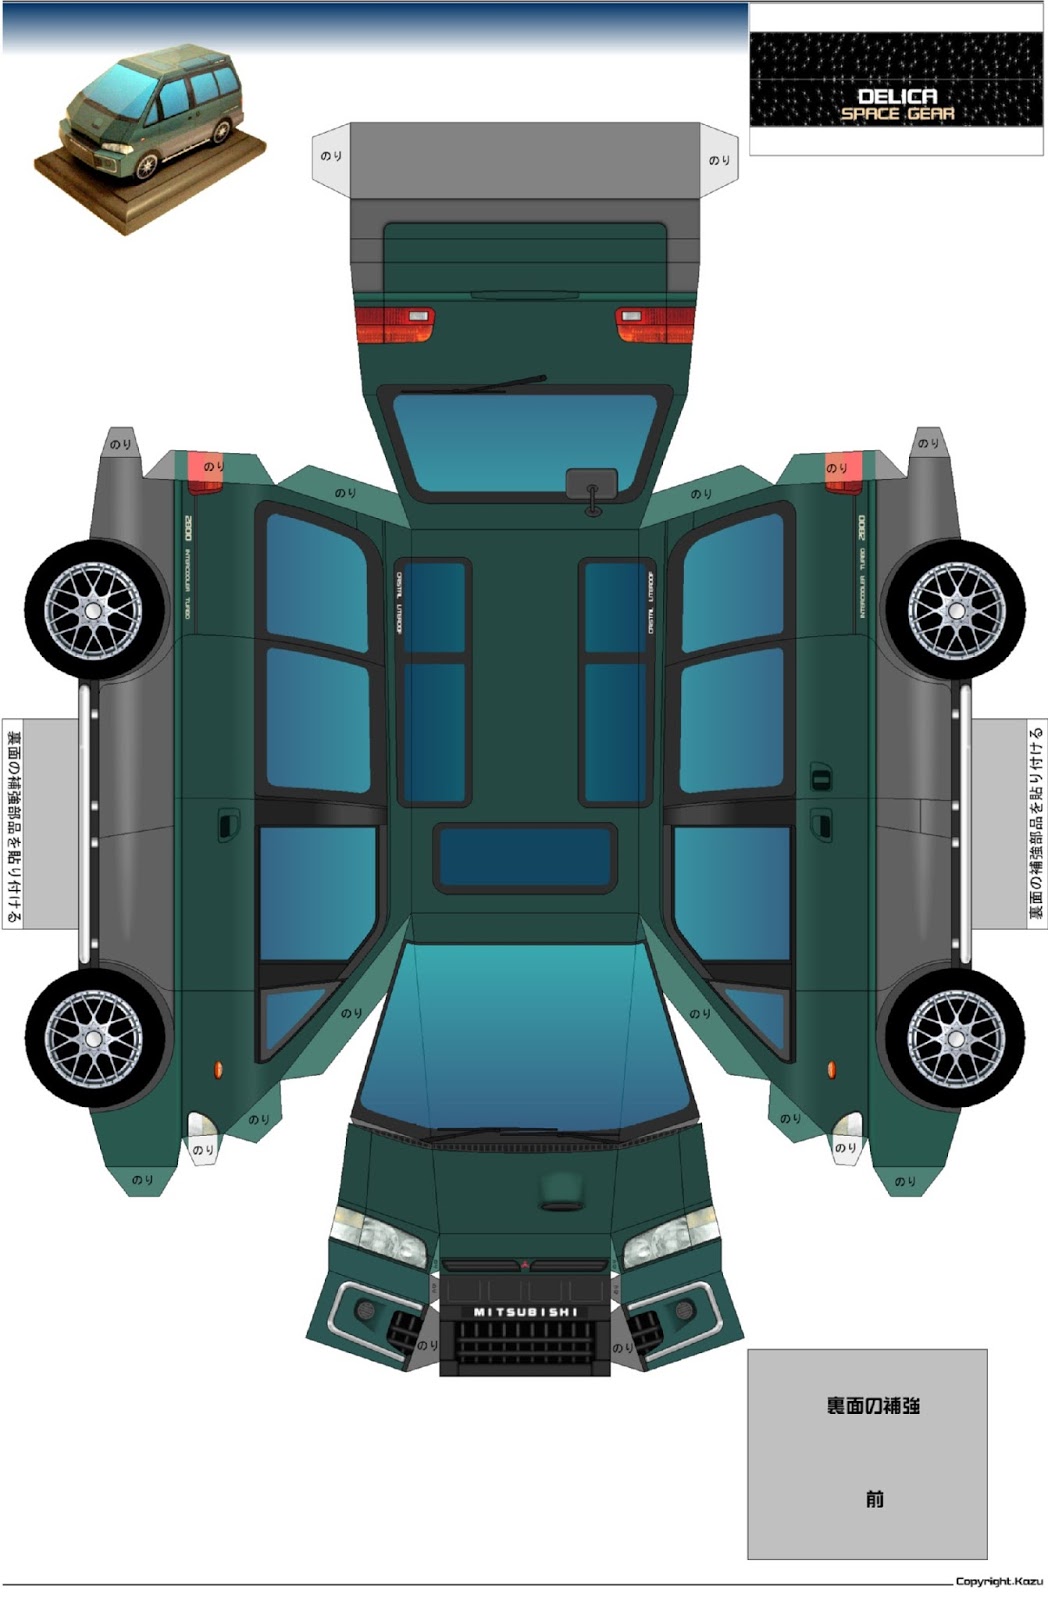 SP Papel Modelismo PaperCraft Mitsubishi Delica Space Gear